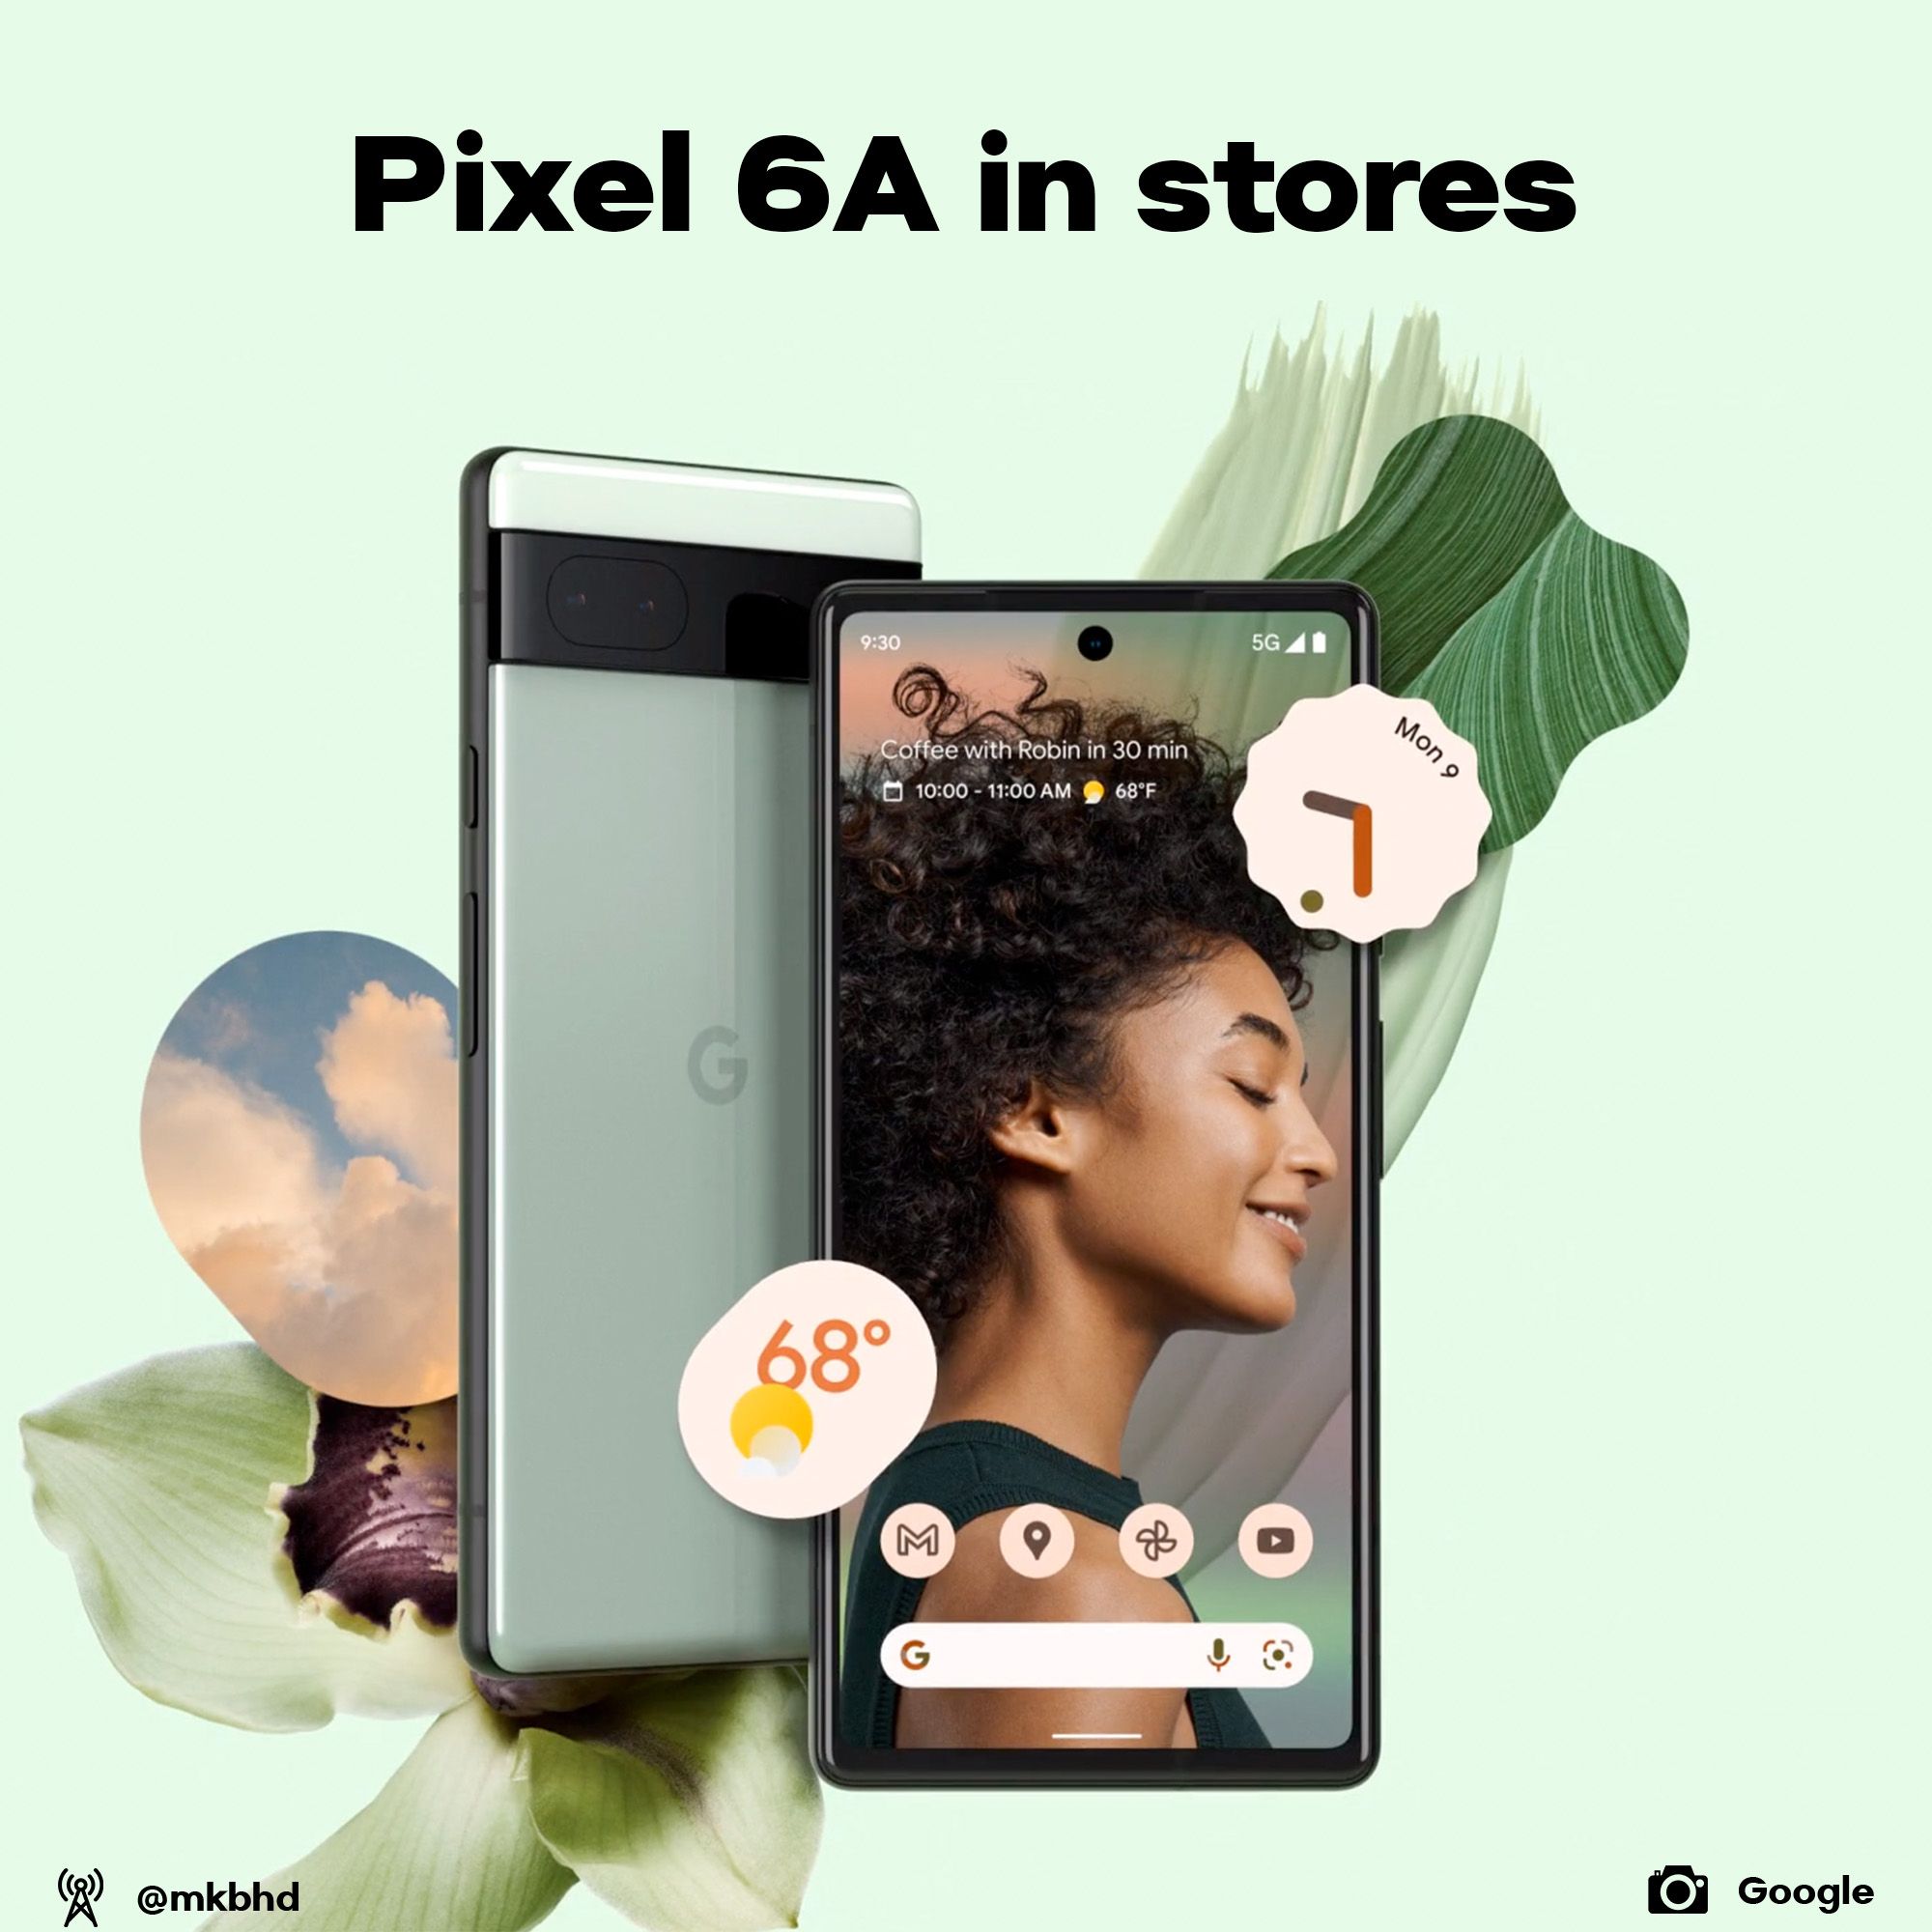 Pixel 6A in stores